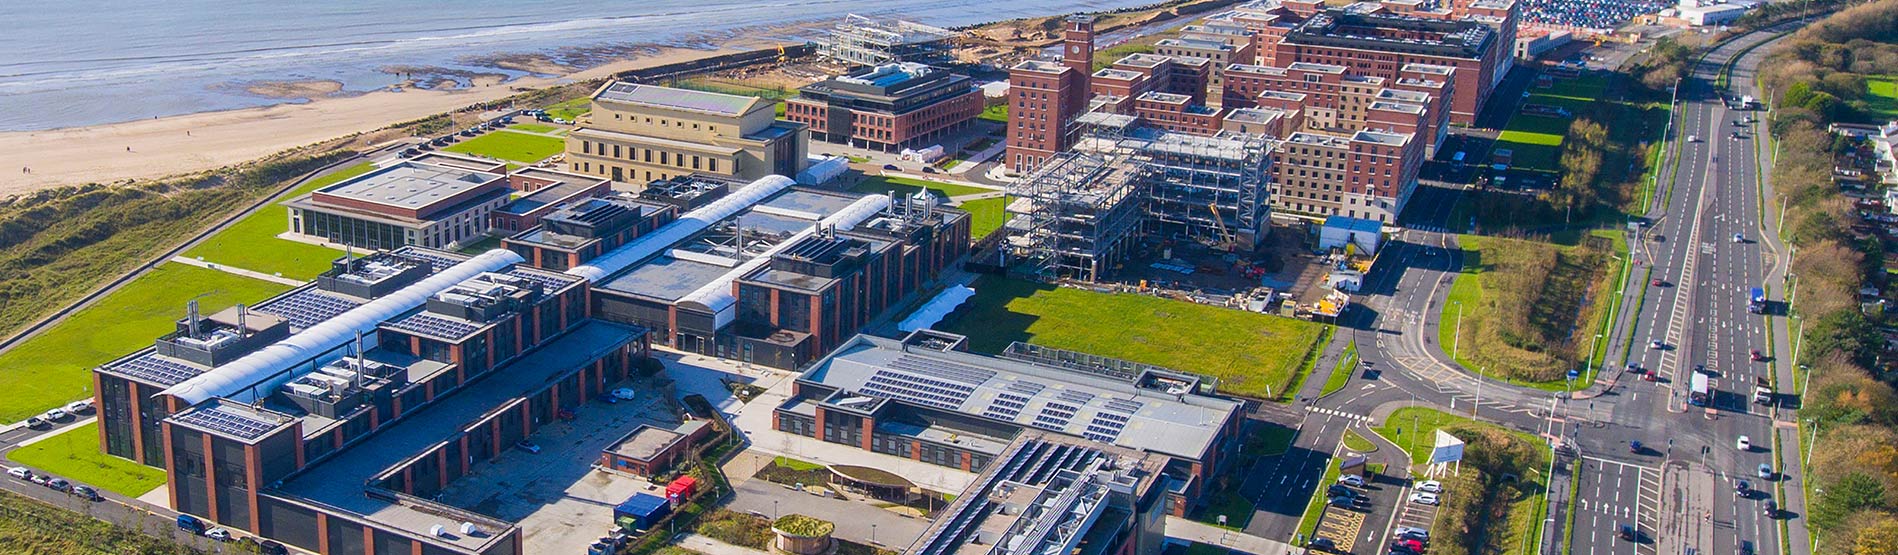 Birds eye view of the bay campus.